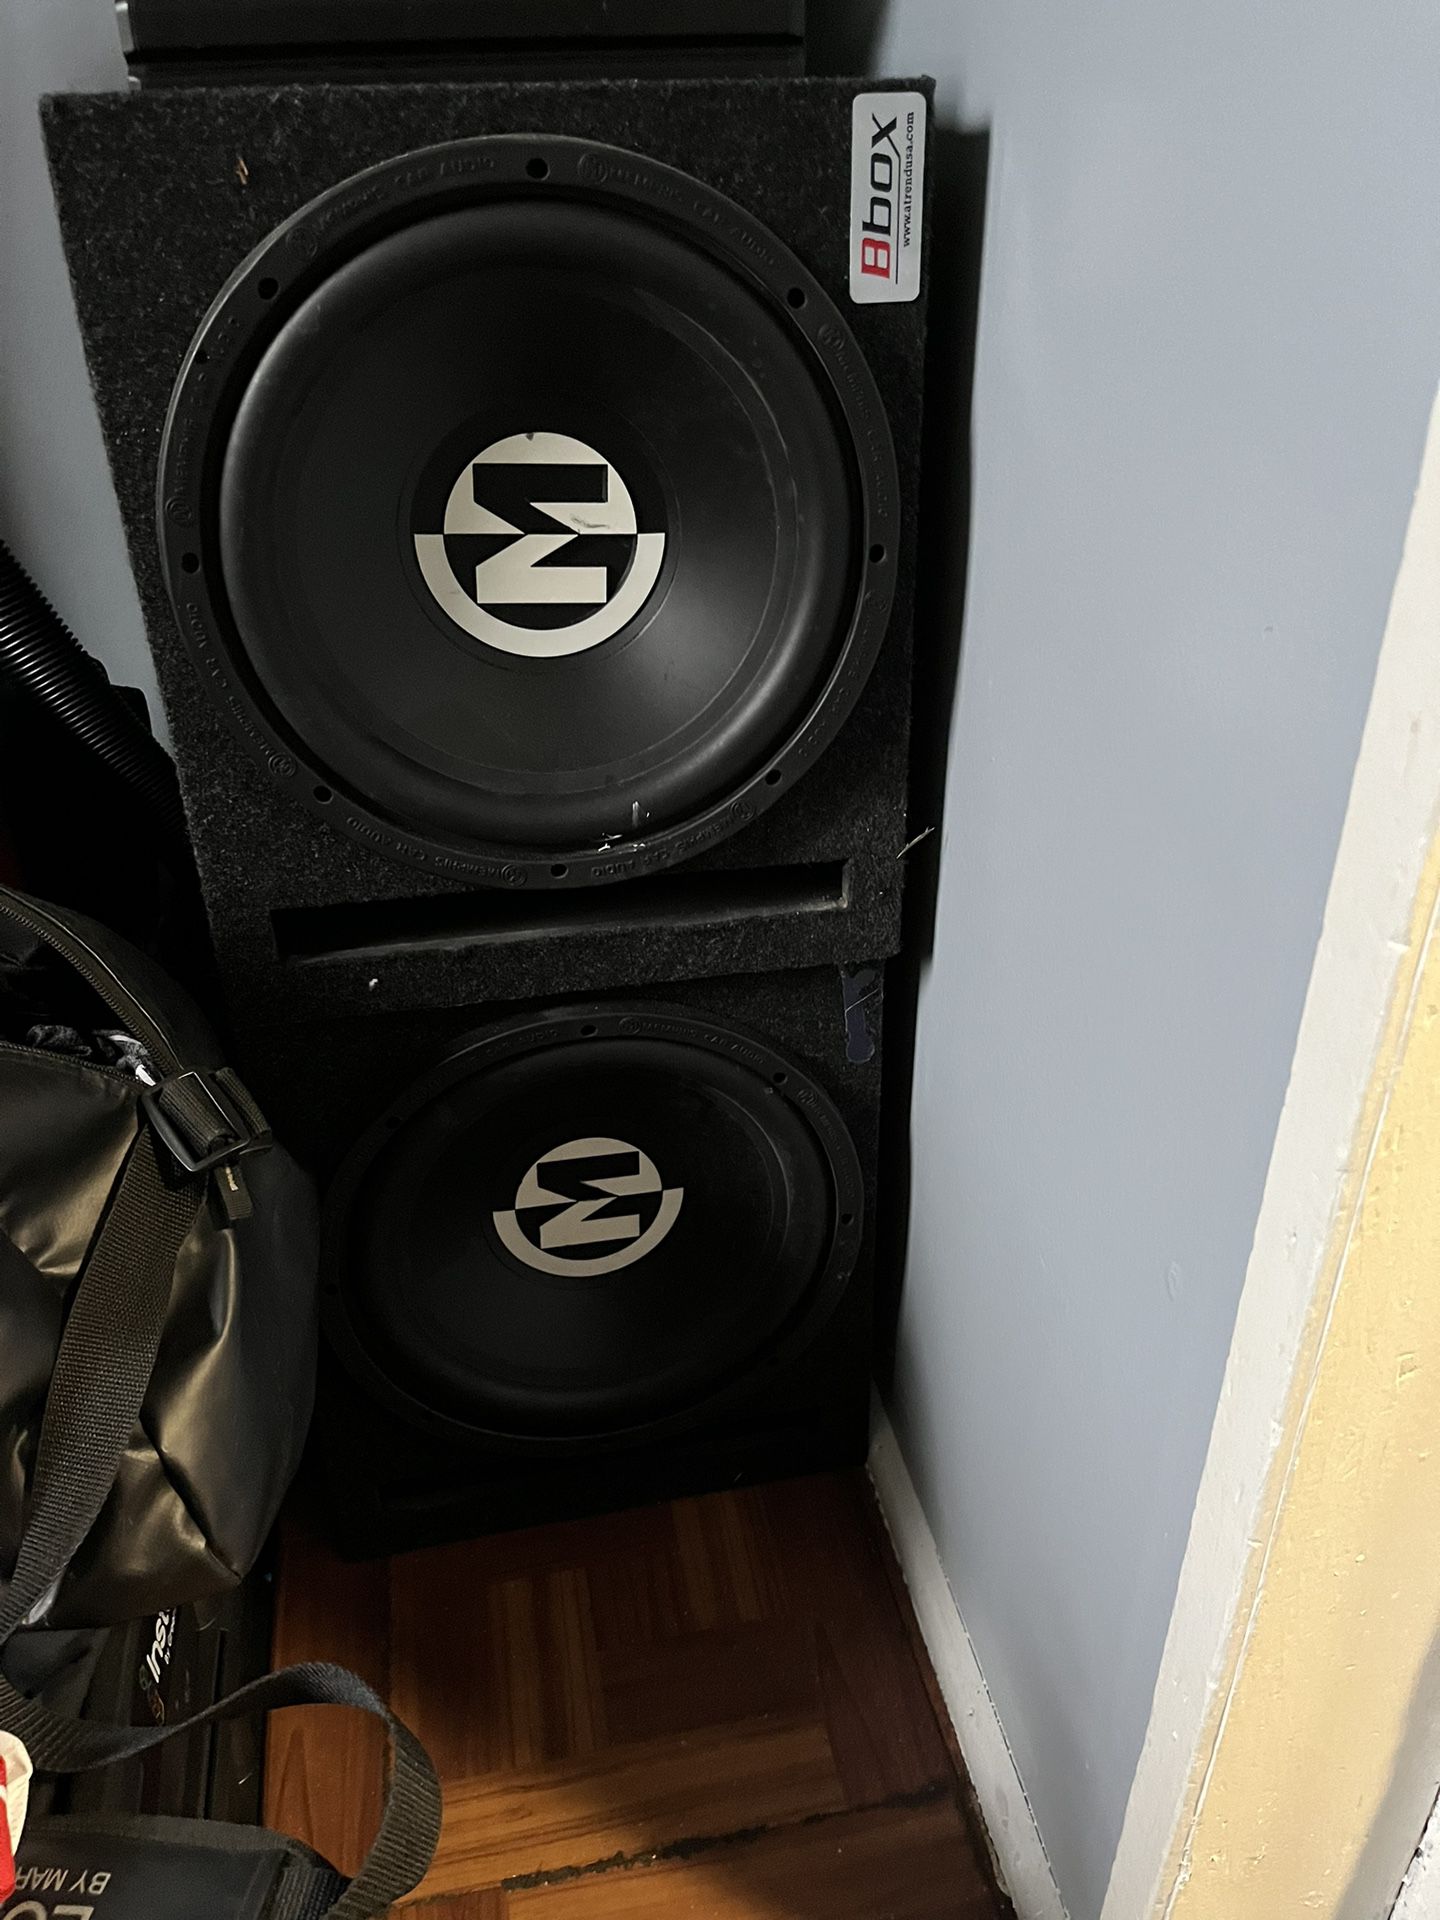 Amplifier With 2 Speakers